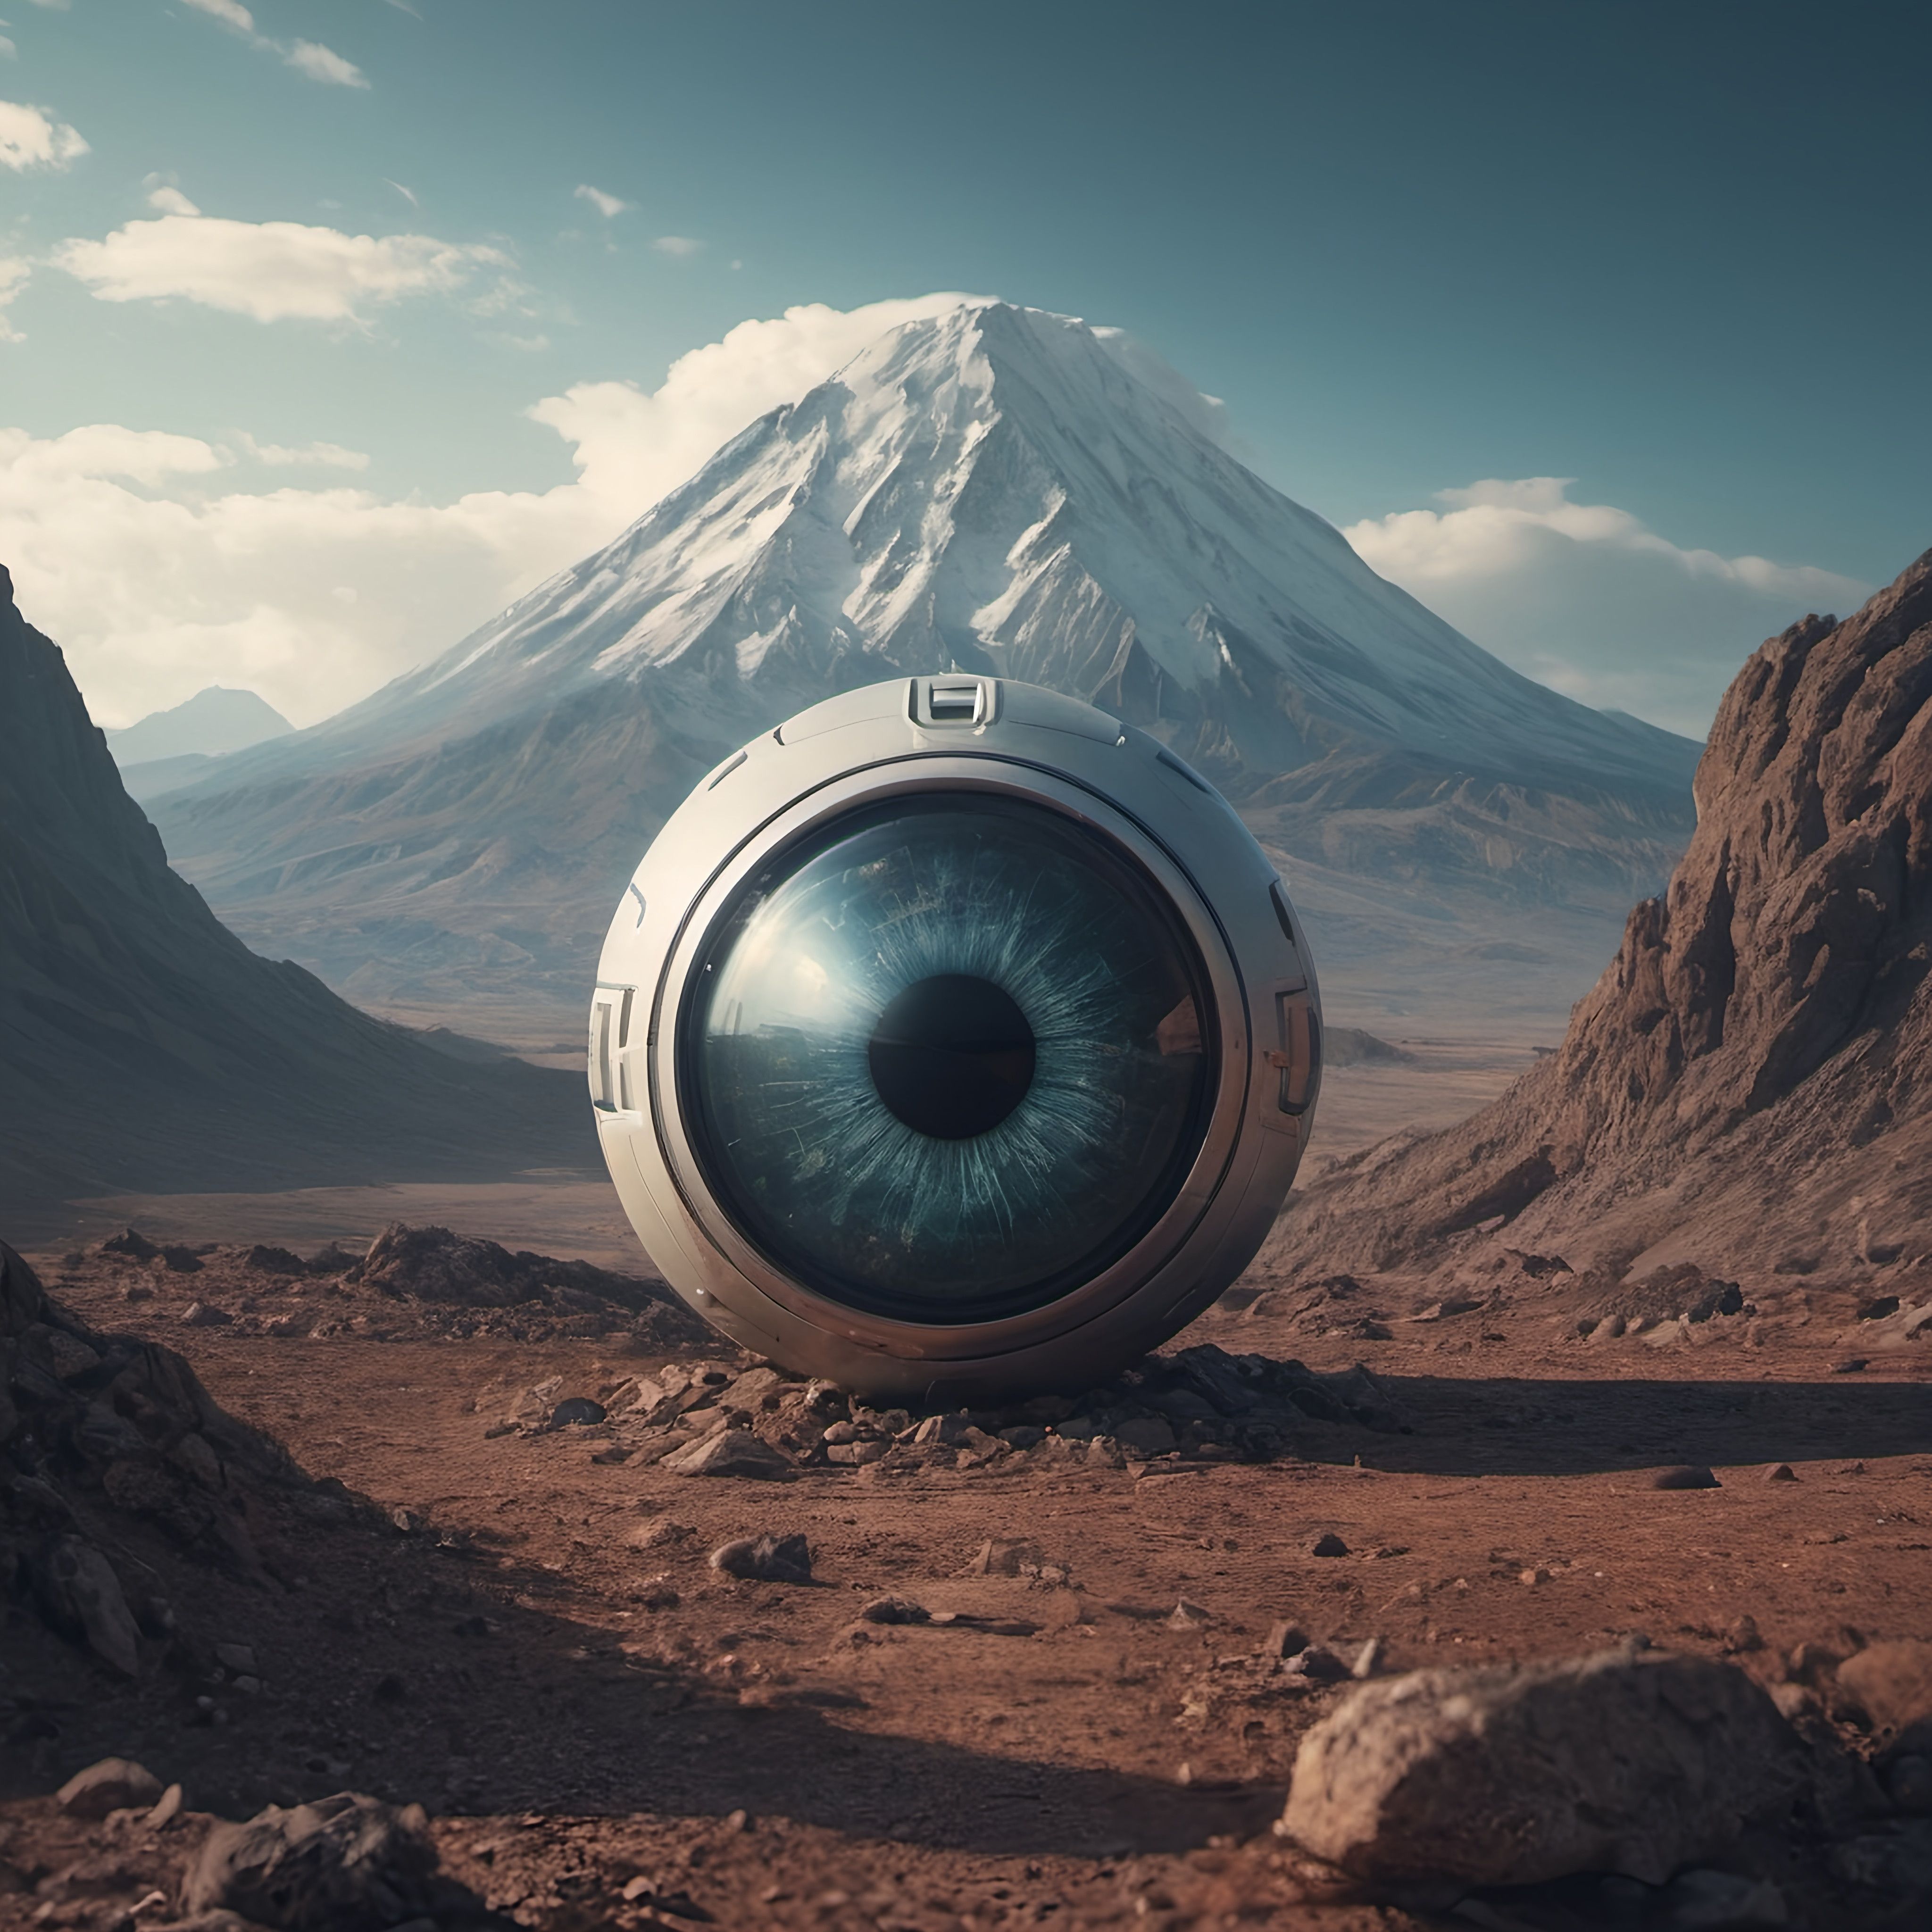 Prompt: a large art object with a large eyeball in the middle of a desert area with a mountain in the background